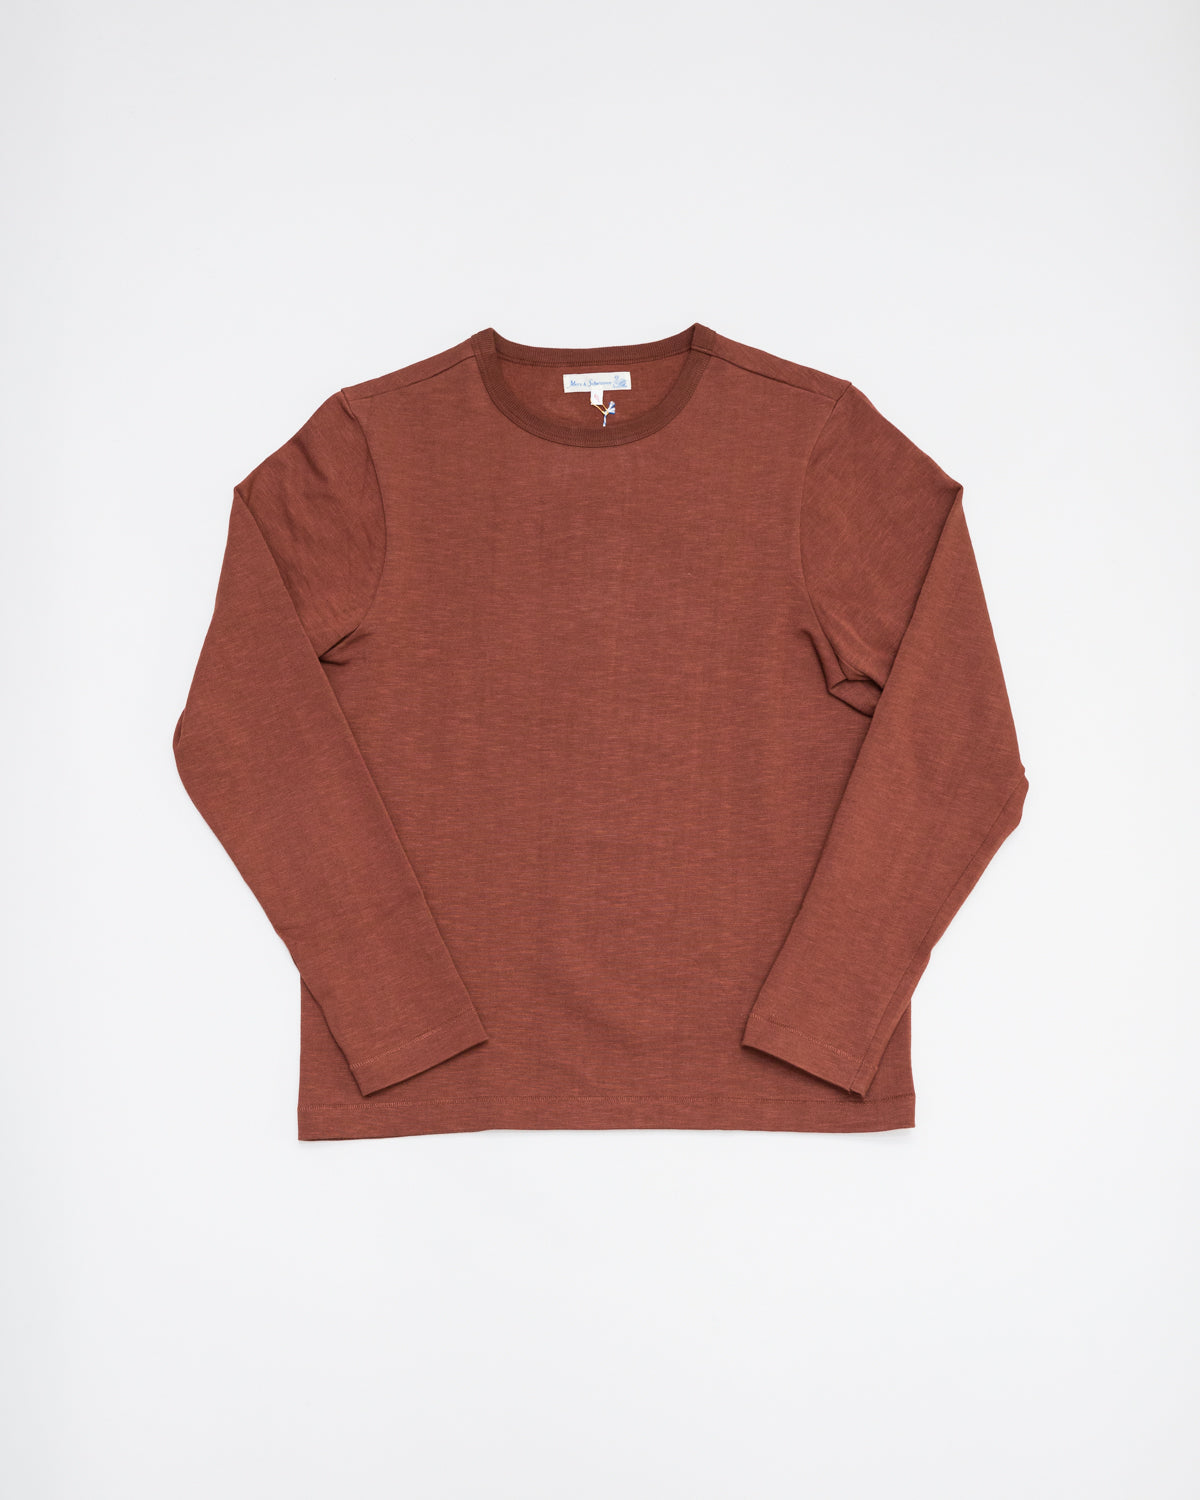 2S18.13 - 13.4oz Loopwheeled Heavy LS T-Shirt Relaxed Fit - Tan | James Dant